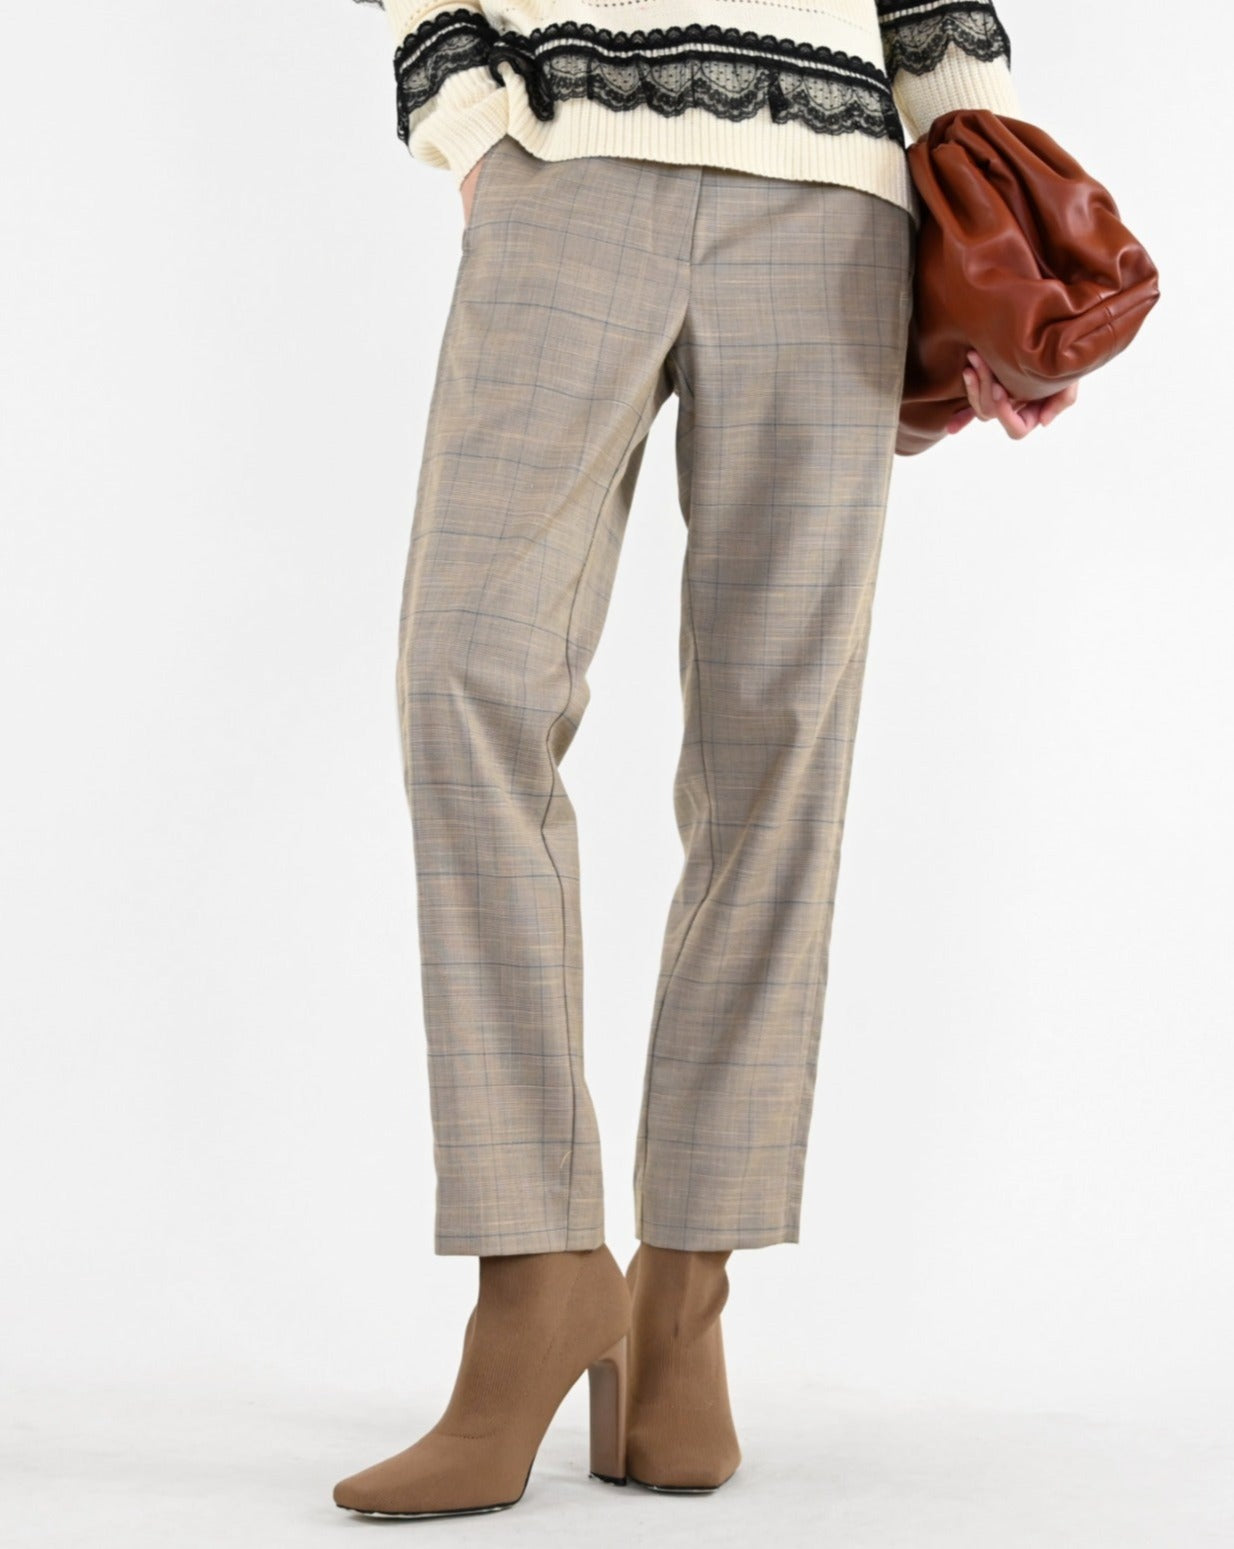 aalis MEO fitted suiting pants (Khaki plaid)